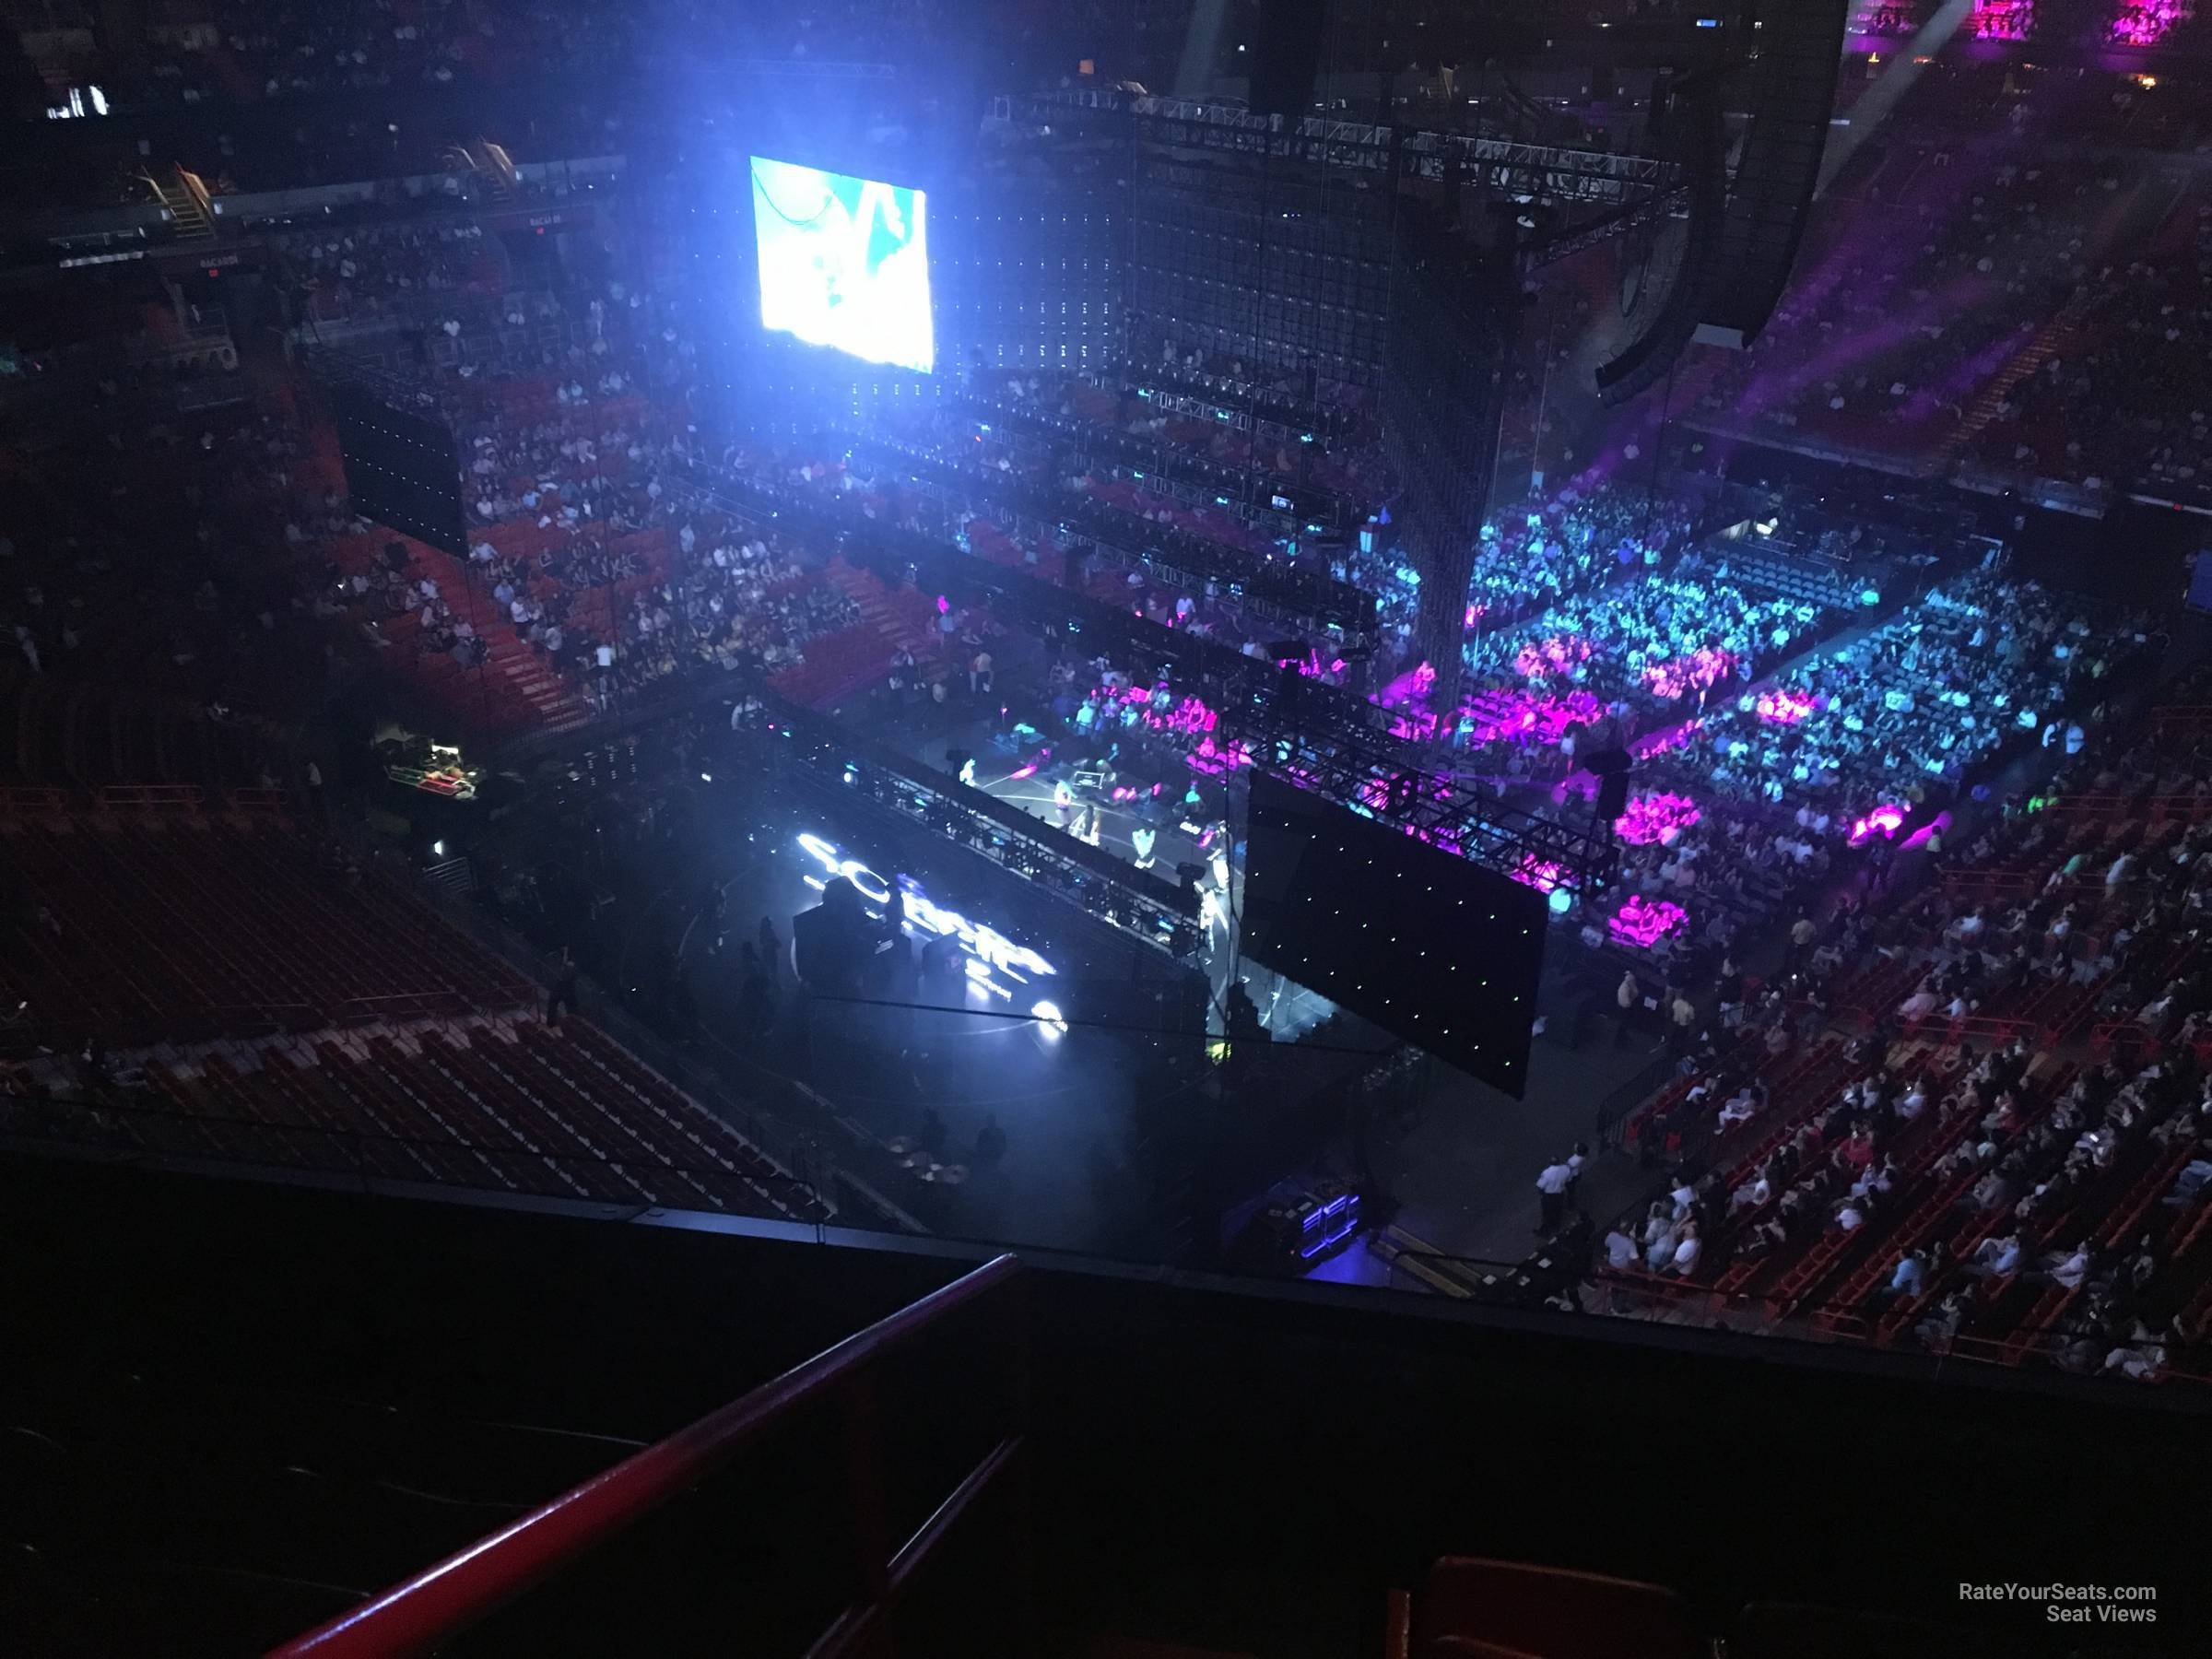 section 402, row 4 seat view  for concert - kaseya center